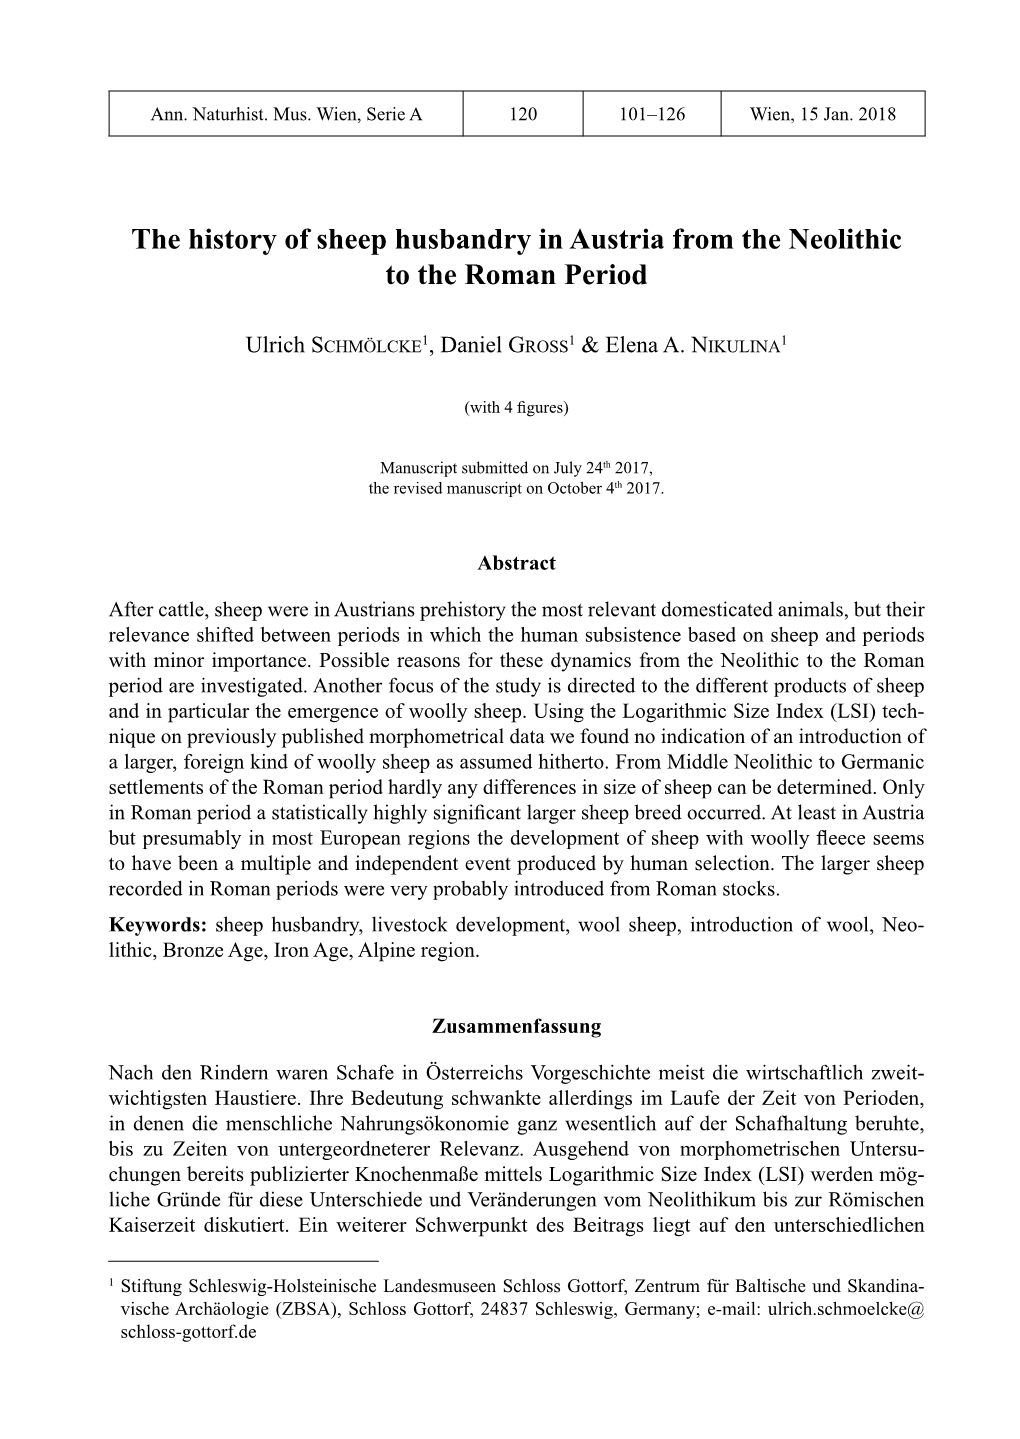 The History of Sheep Husbandry in Austria from the Neolithic to the Roman Period